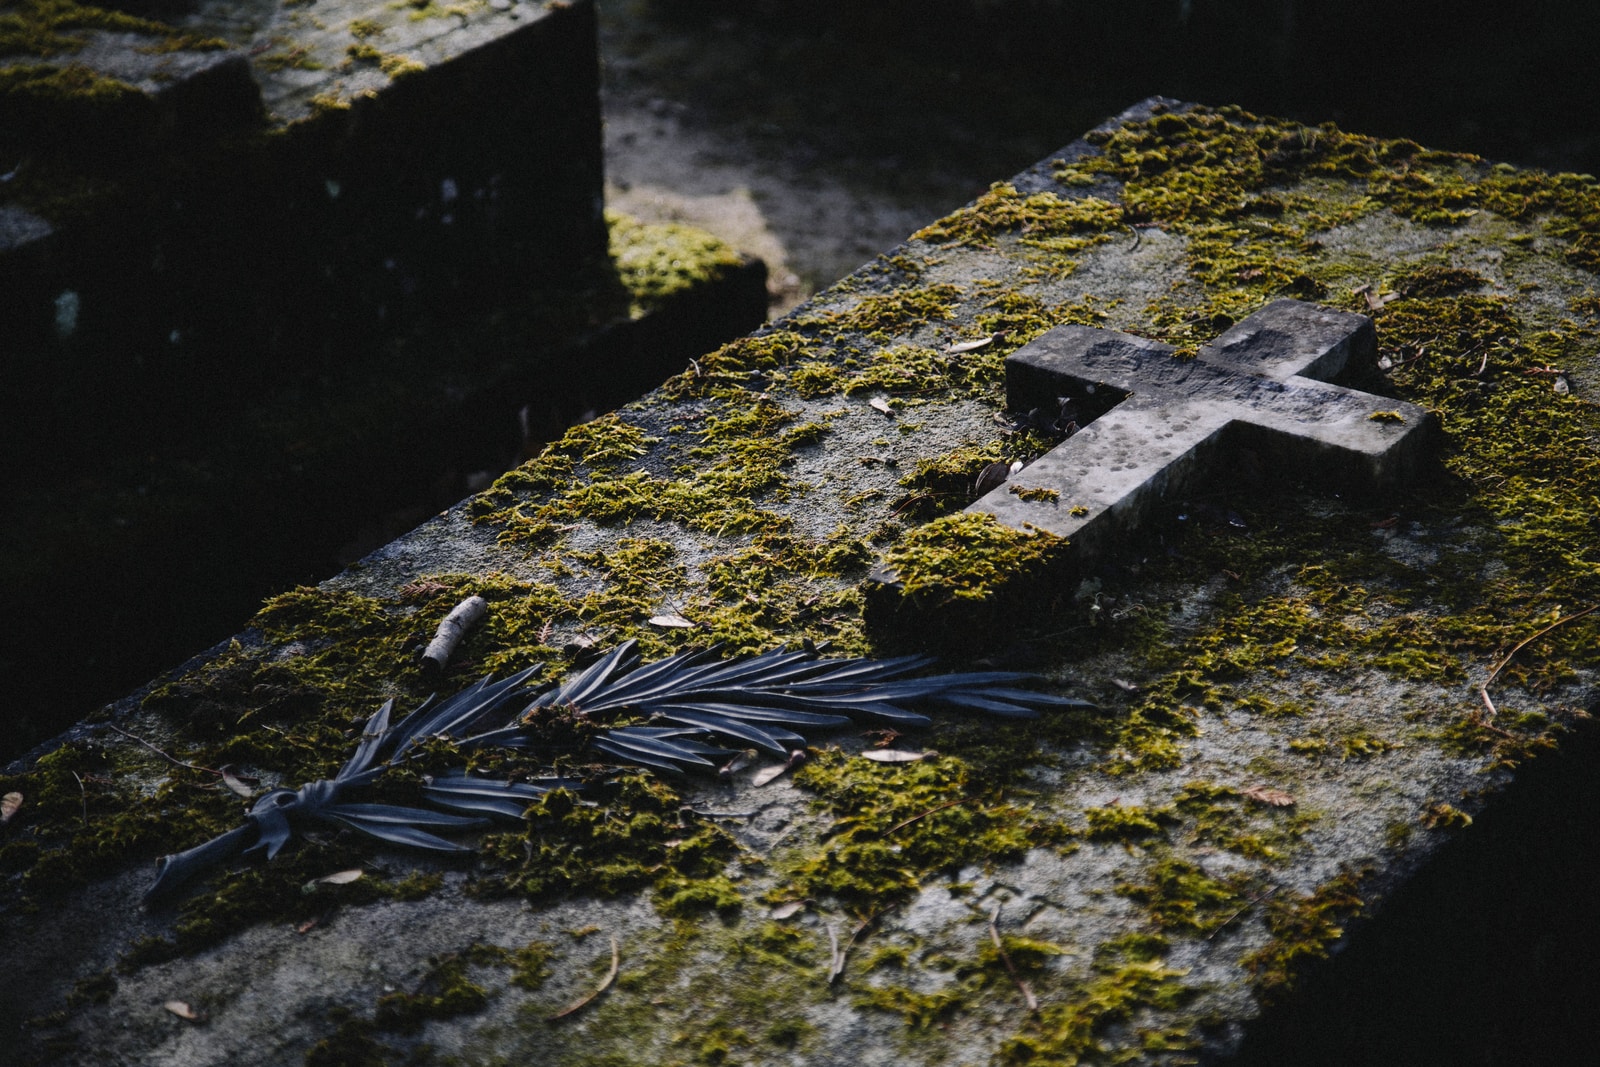 How Facing Death with Christian Hope Can Help Us Find New Life in Christ